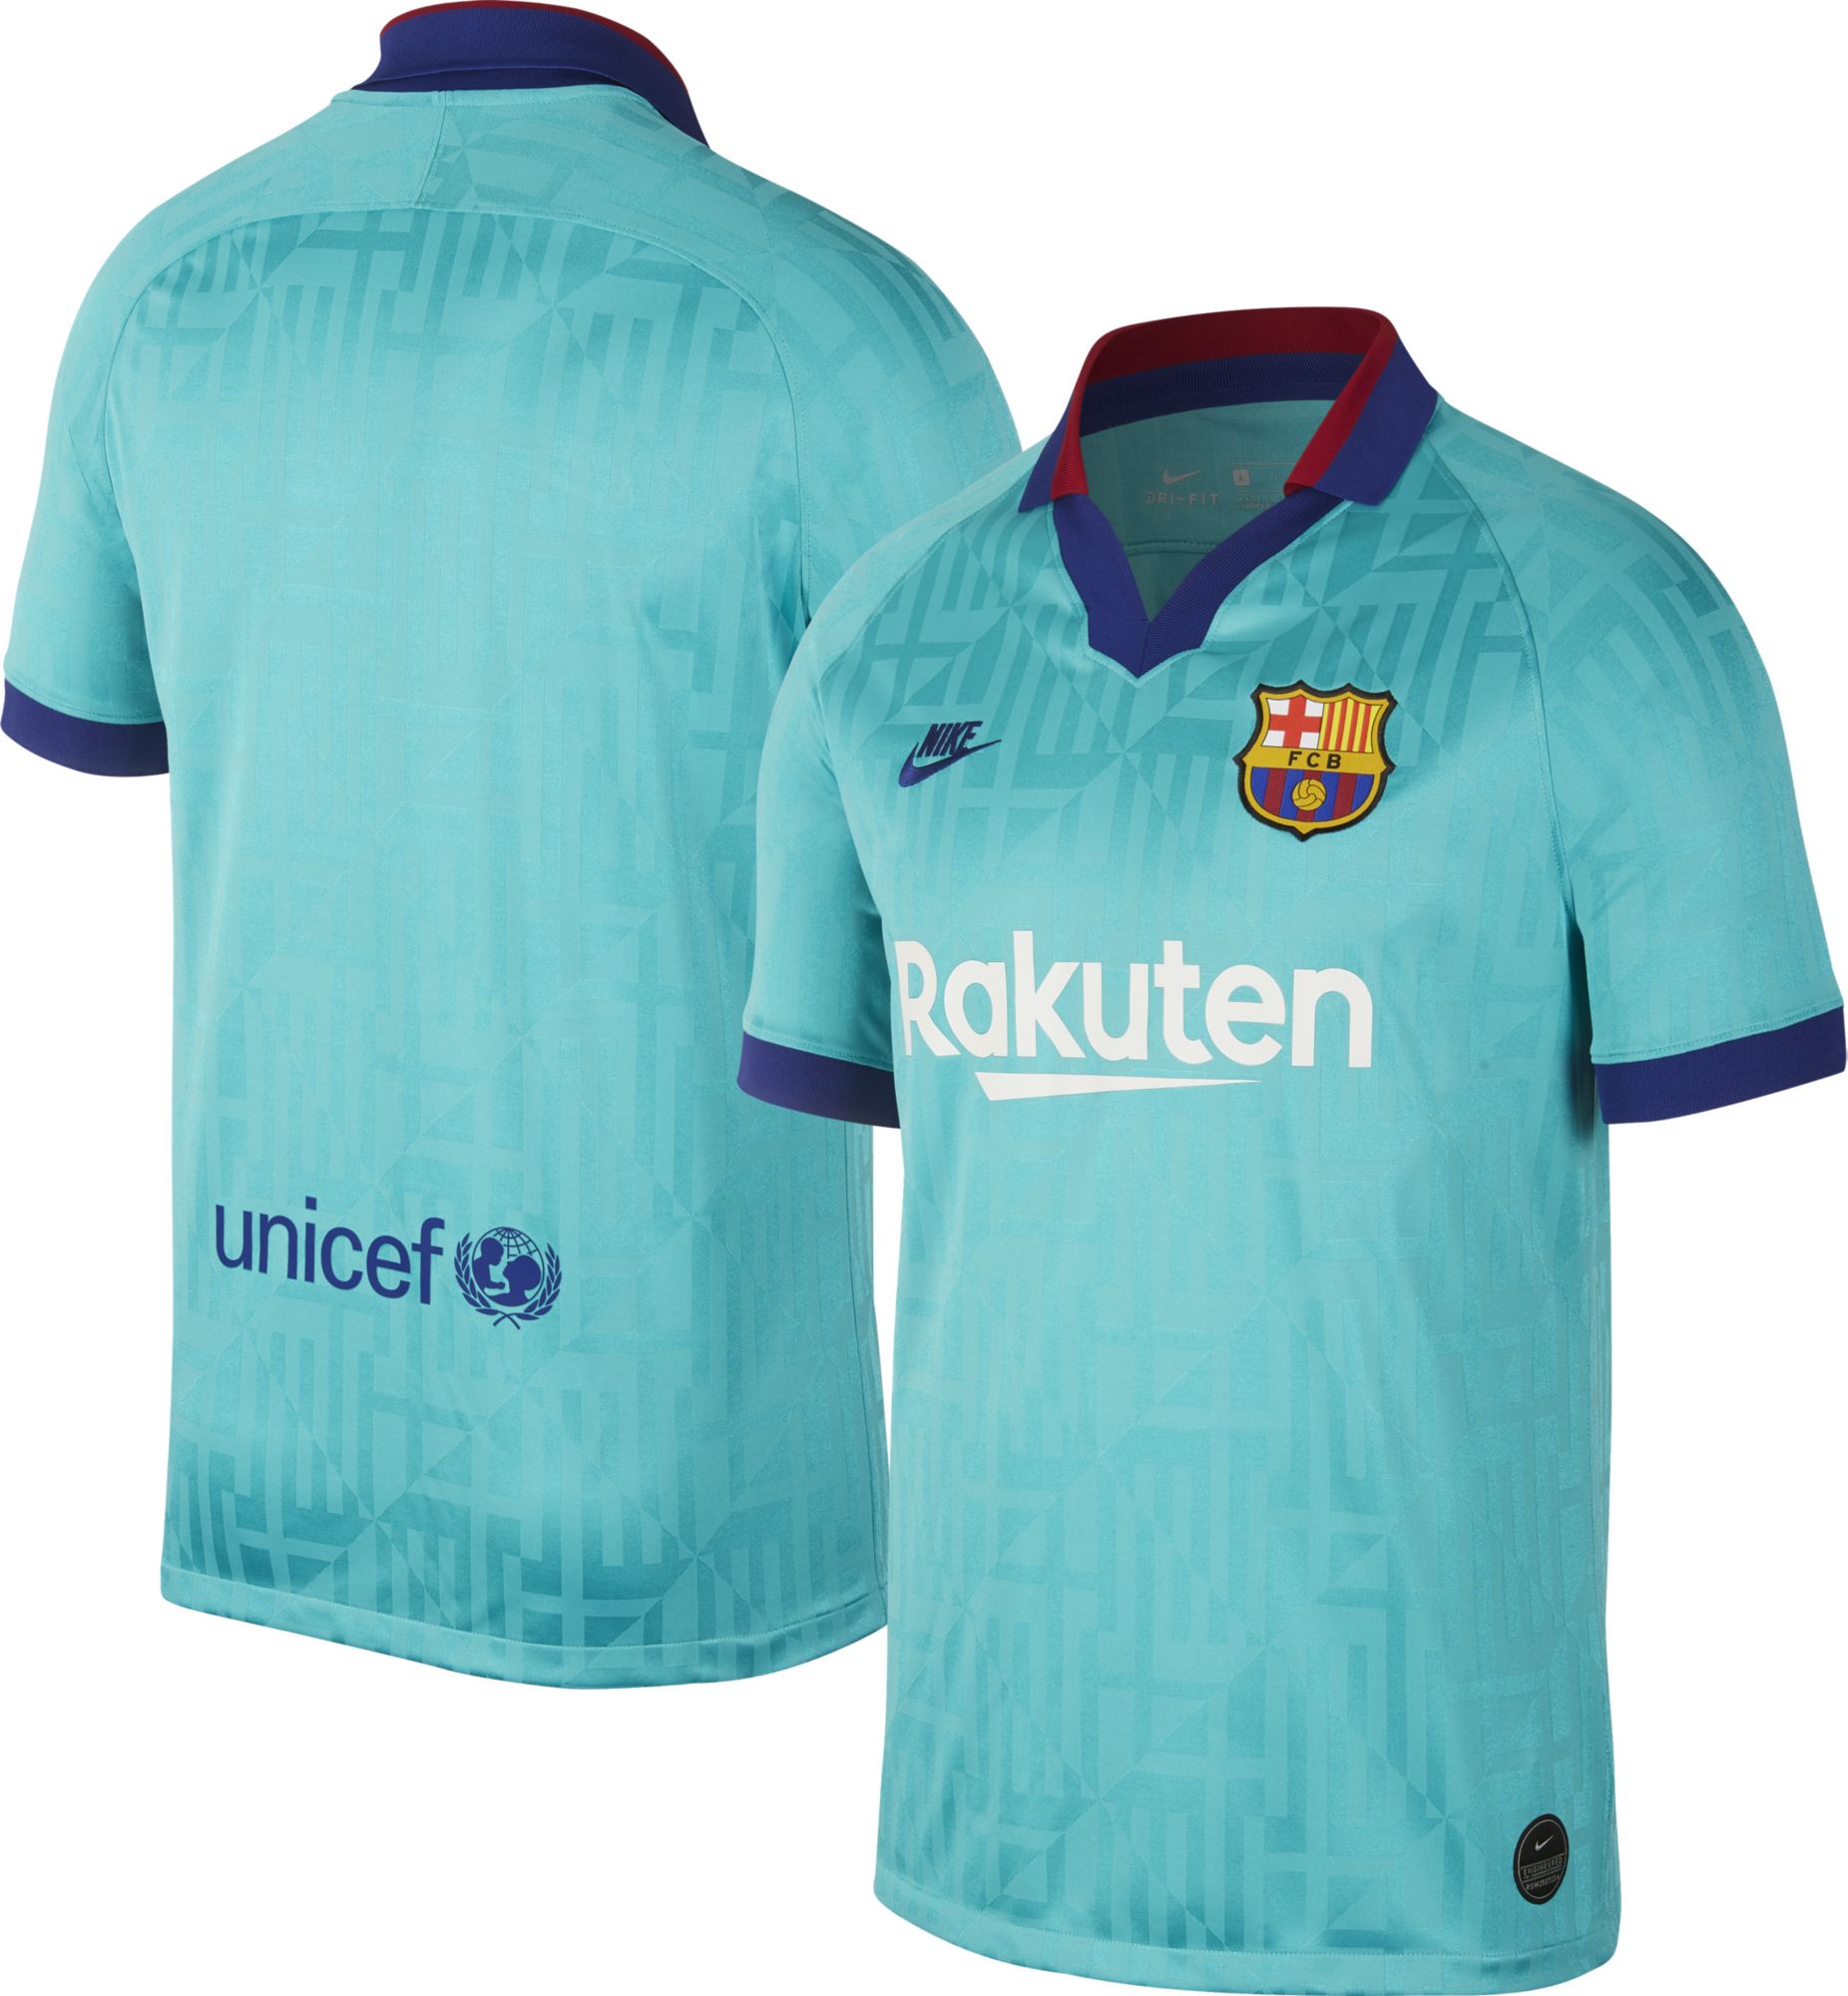 fc barcelona official jersey